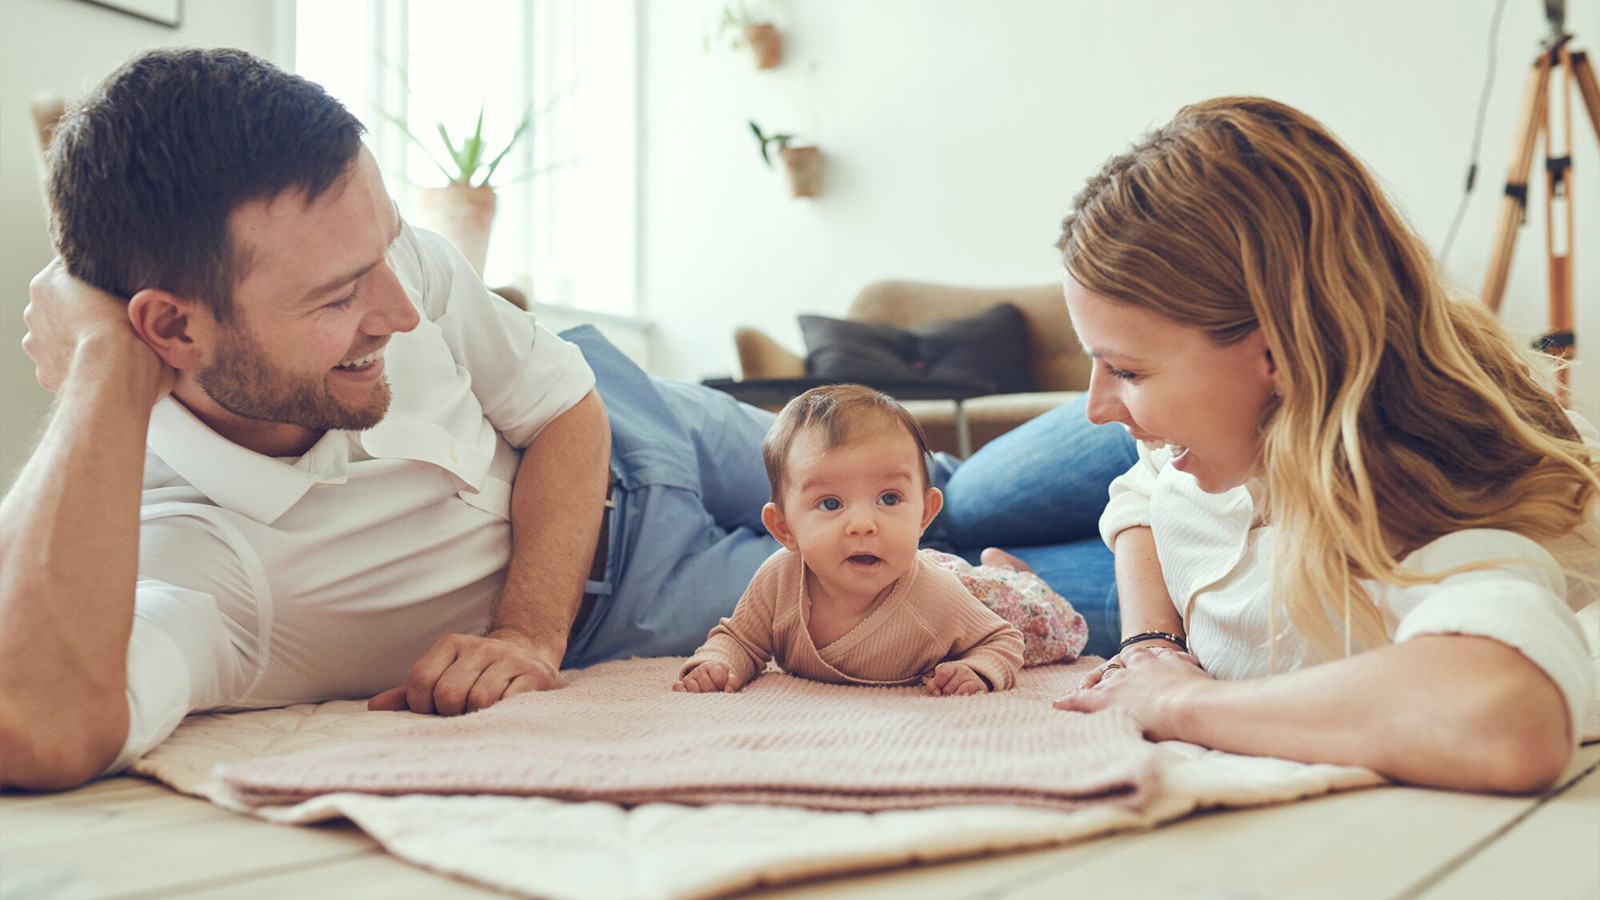 mother and father playing on blanket with infant, immigrant parents, citizenship